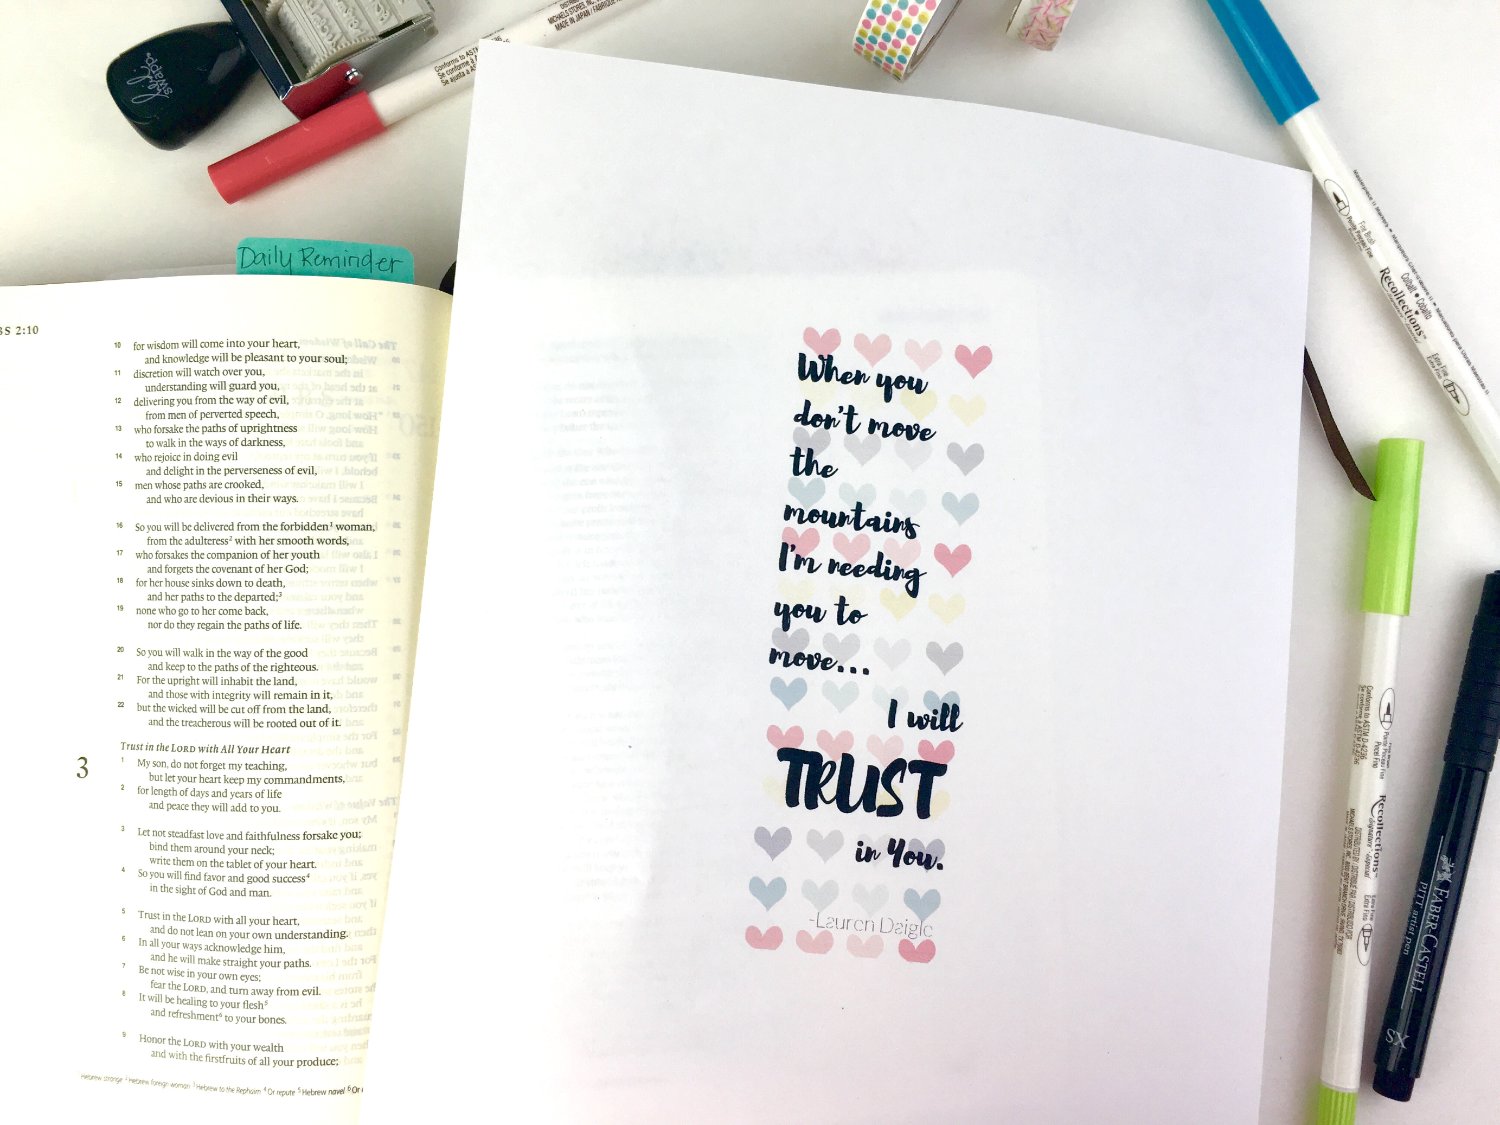 http://www.thesoutherncouture.com/wp-content/uploads/2016/09/Song-Lyrics-Printable-for-Bible-Journaling-1.jpg